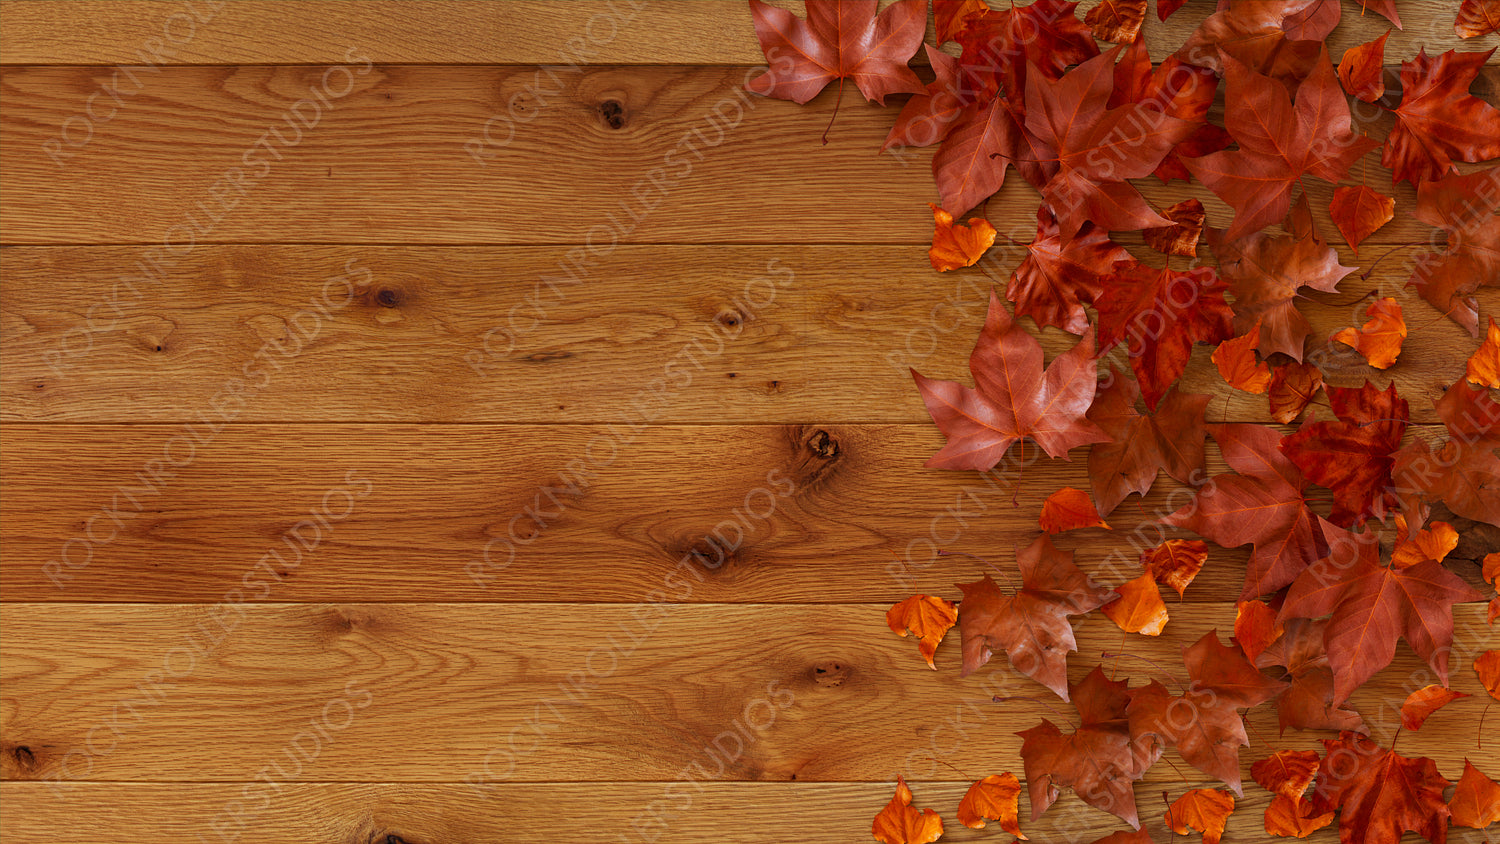 Thanksgiving Wallpaper with Autumn leaves on Natural wood Tabletop.